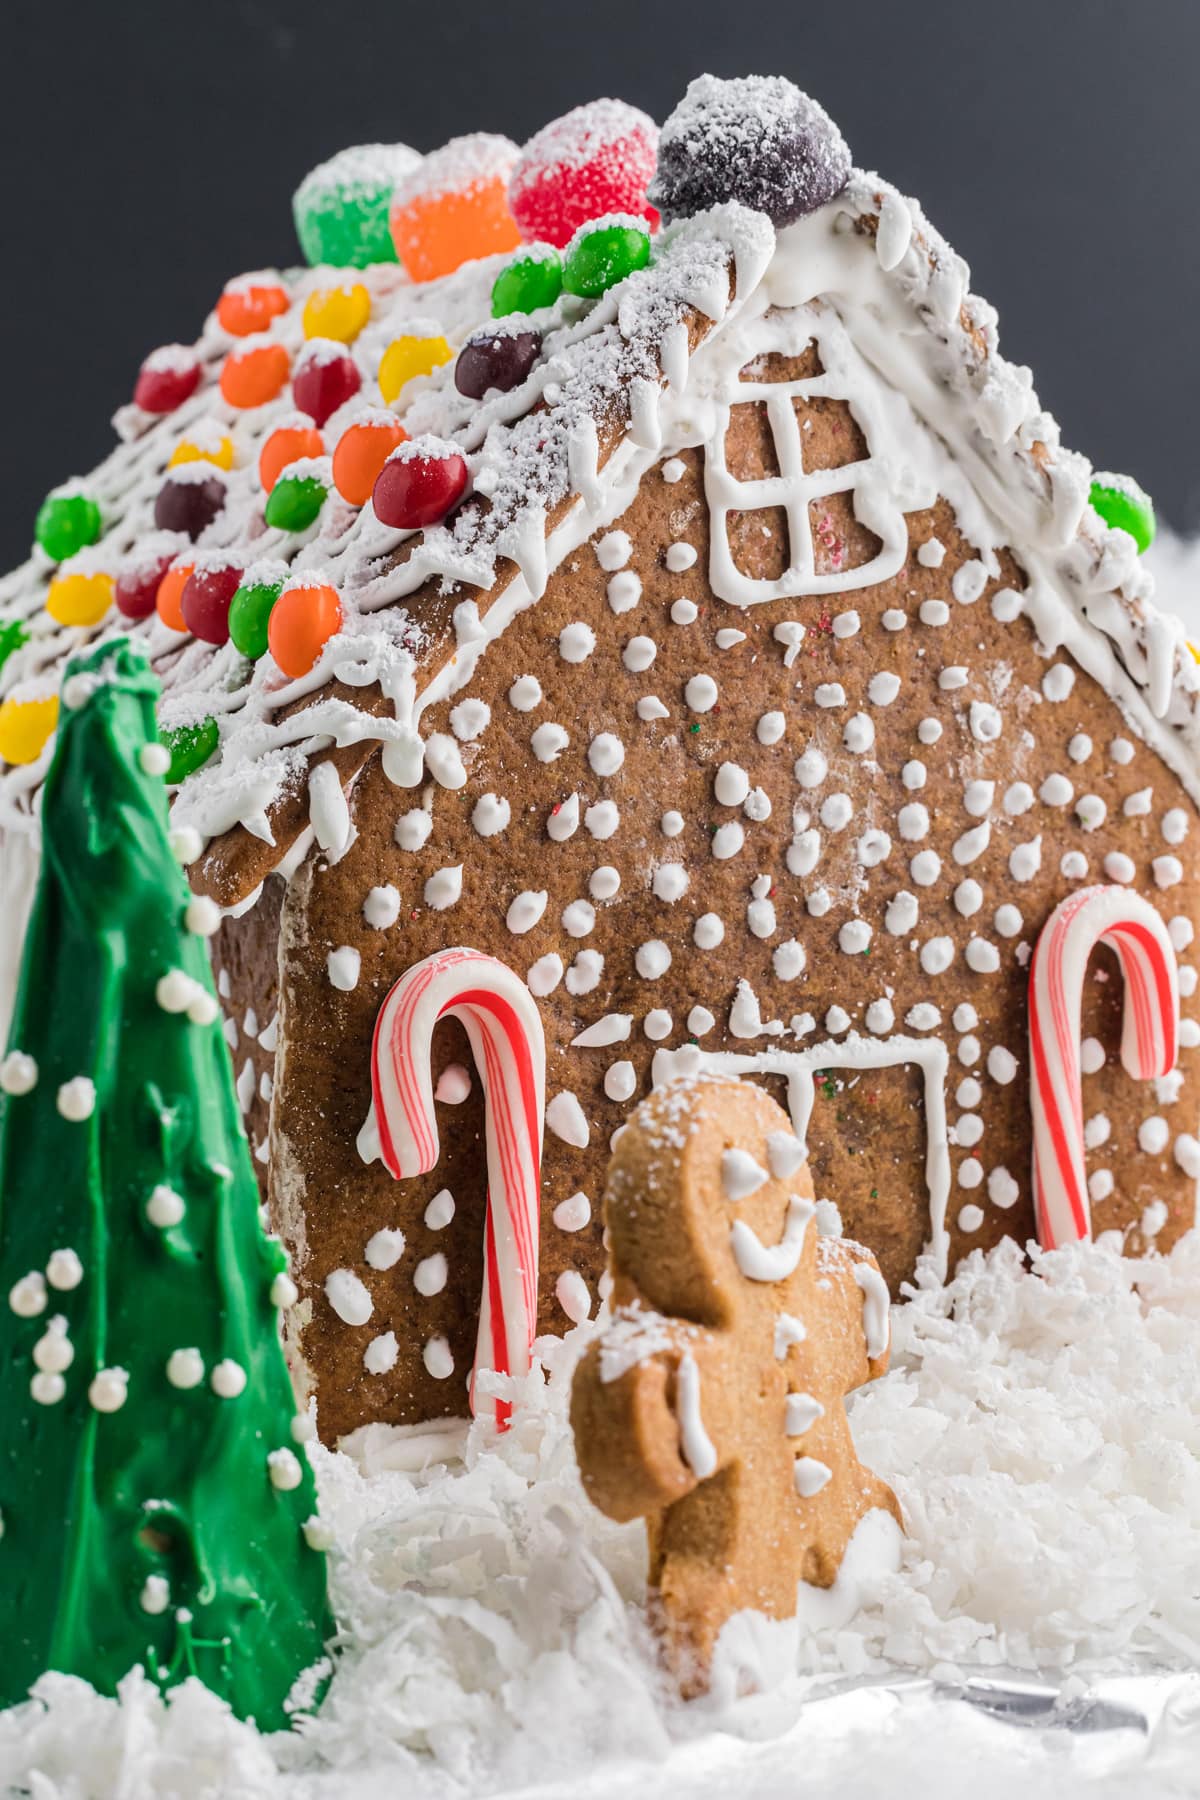 Decorated Gingerbread House with Gingerbread Men and candy canes.